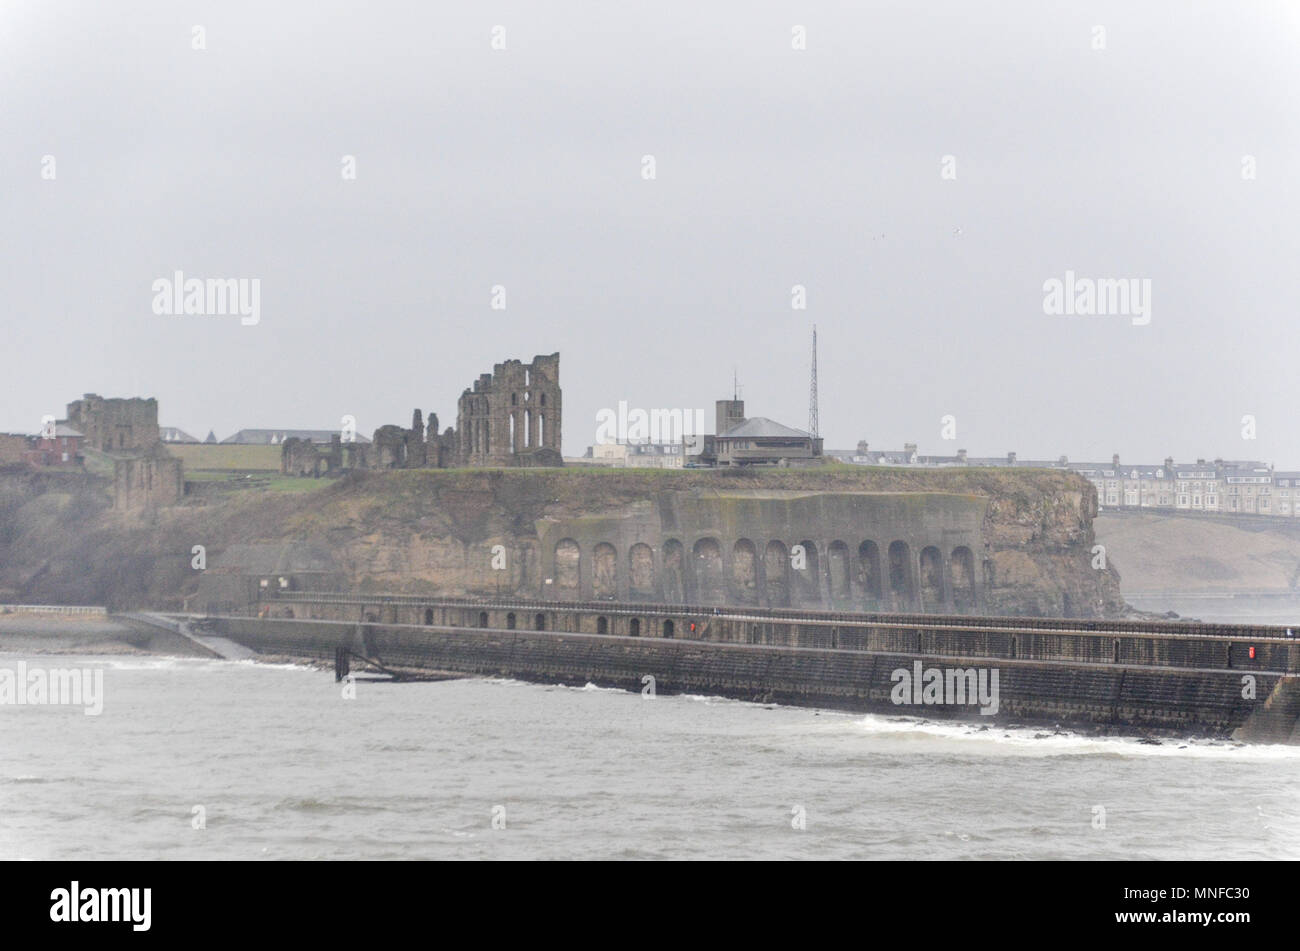 Tynemouth Priory and Castle, Newcastle, UK Stock Photo